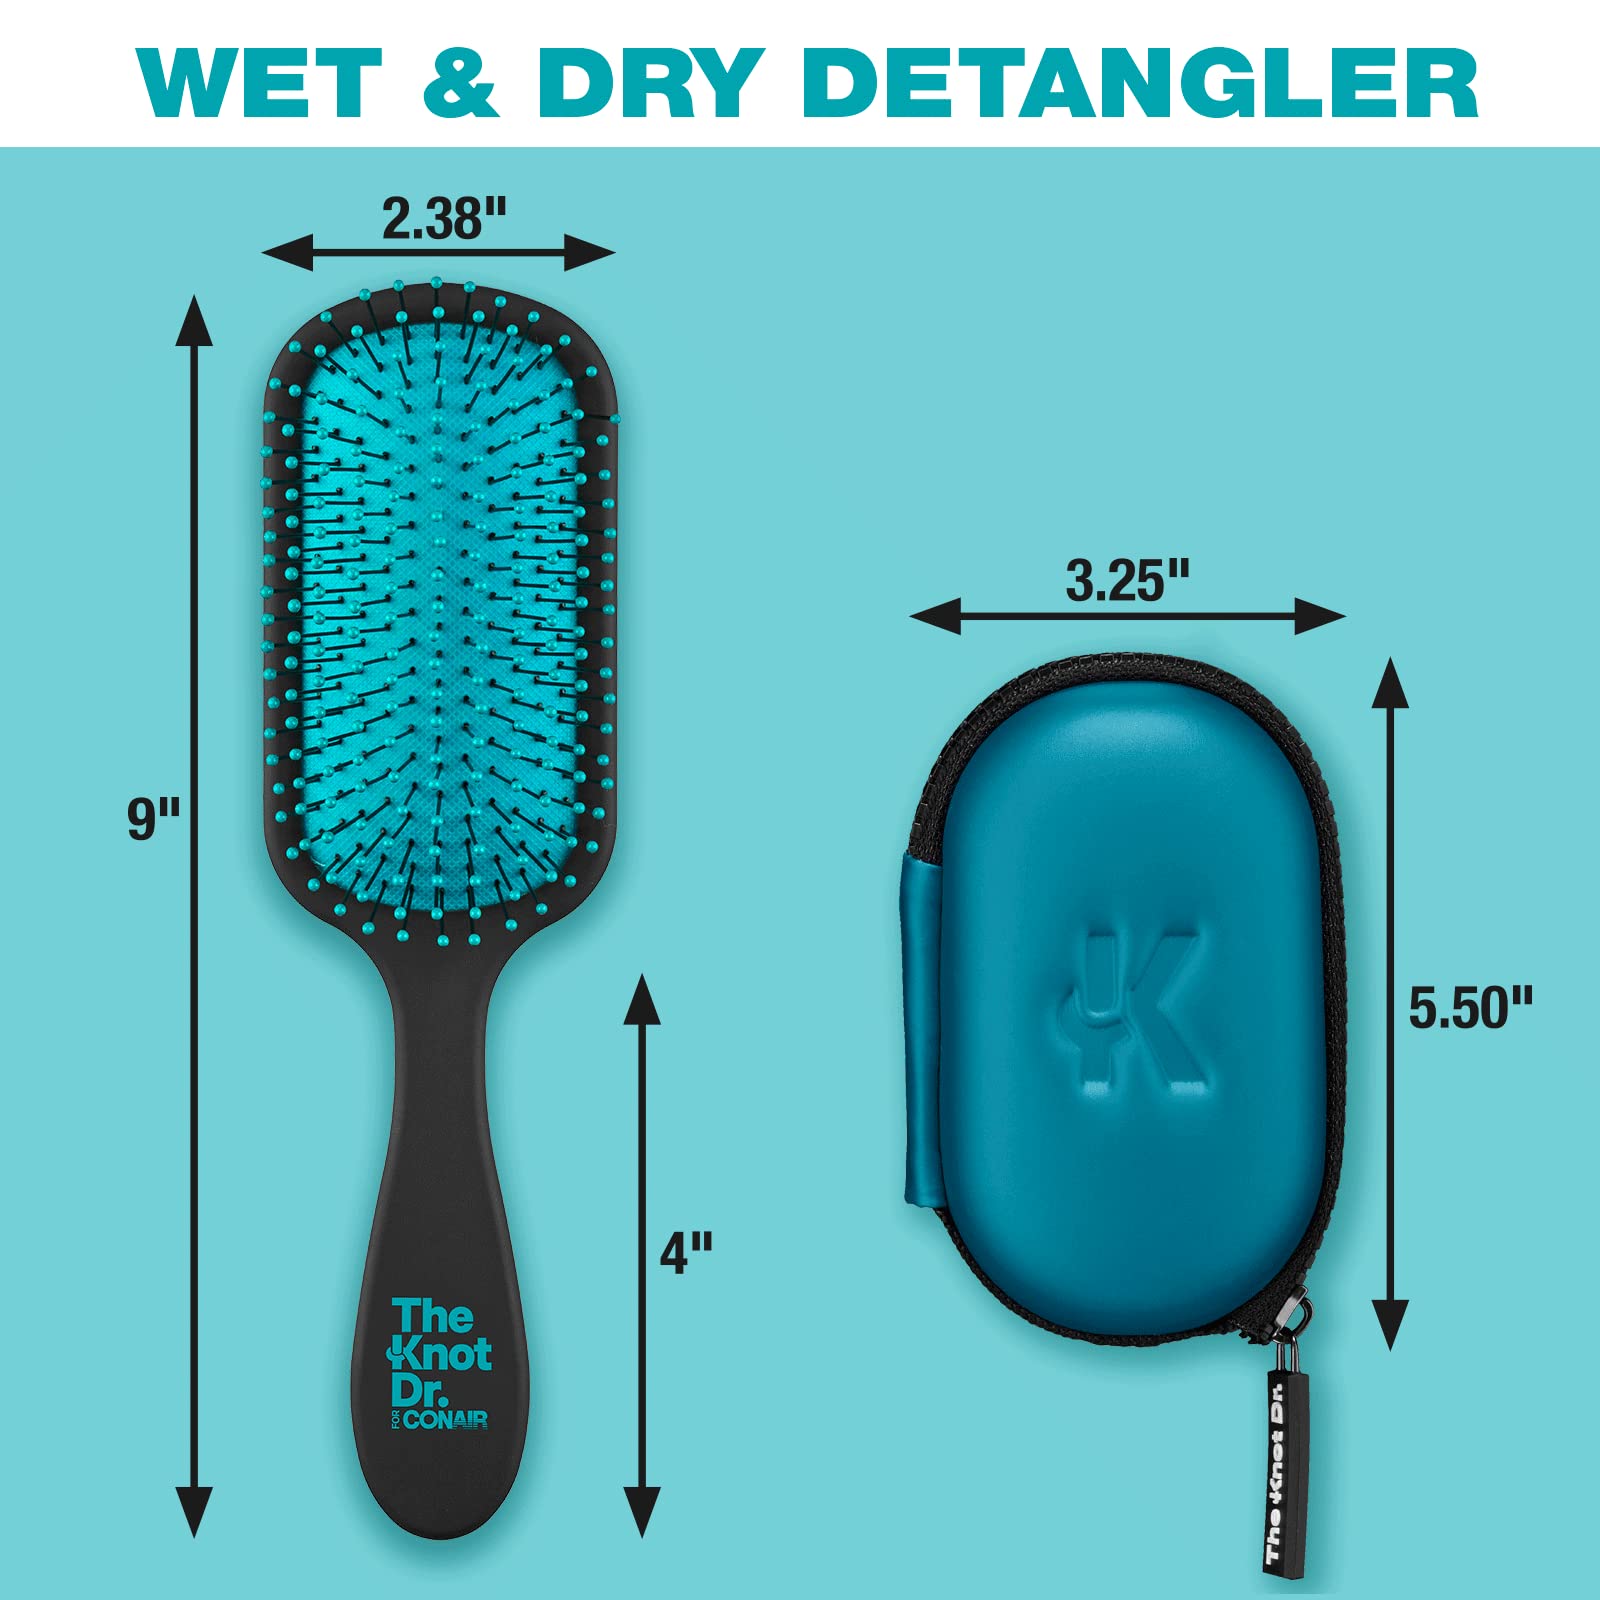 The Knot Dr. for Conair Hair Brush, Wet and Dry Detangler with Storage Case, Removes Knots and Tangles, For All Hair Types, Blue